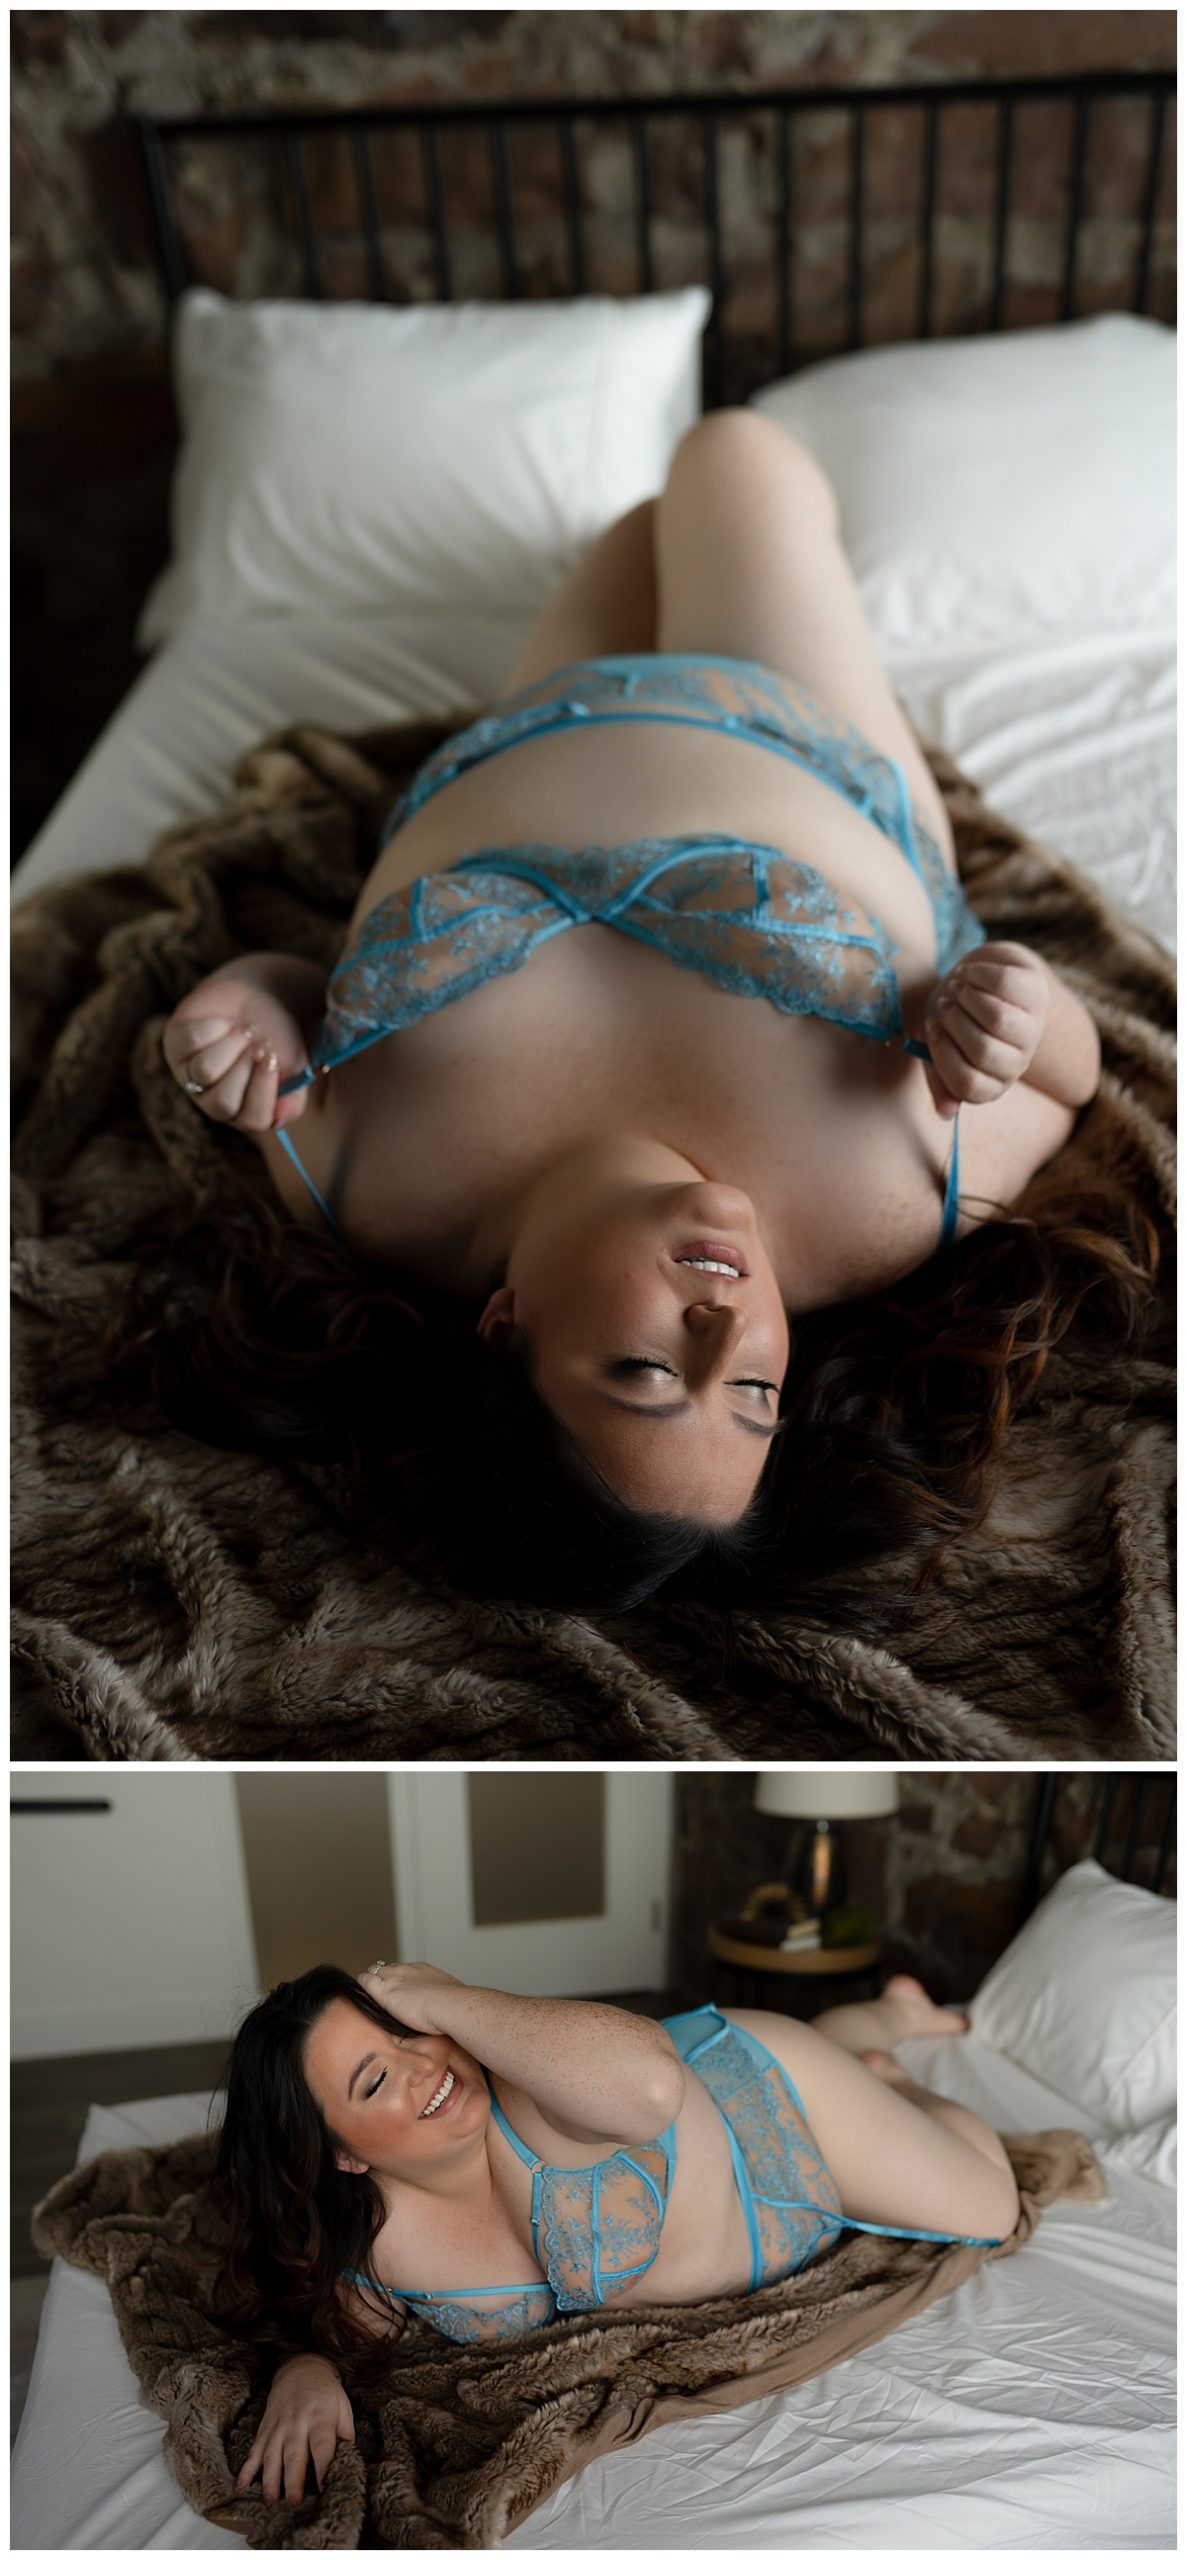 Adult lays on bed in teal lingerie for Sioux Falls Boudoir Photographer